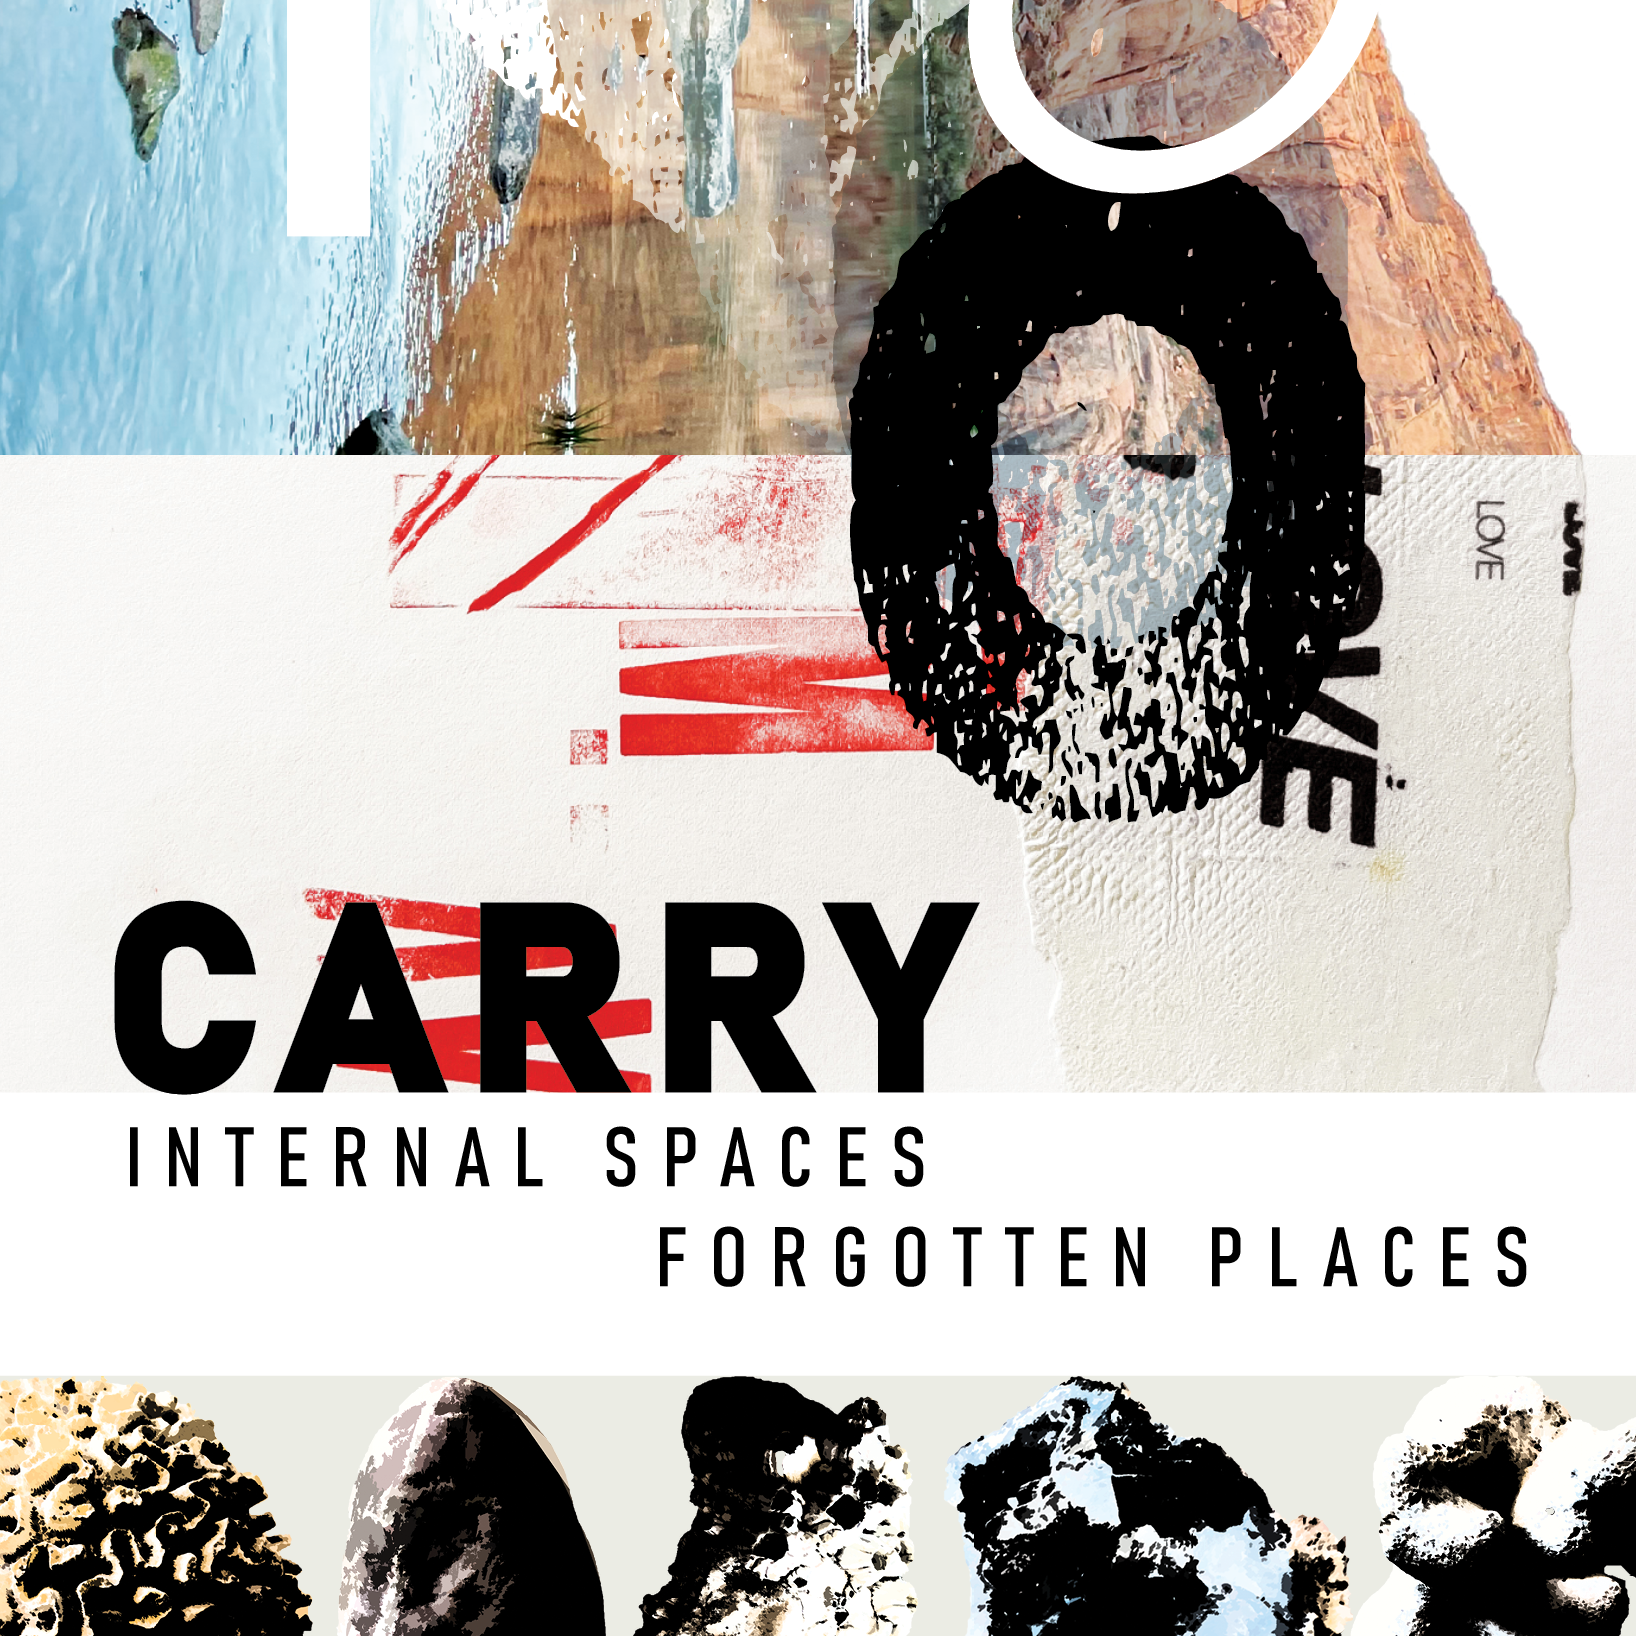 "What You Carry: Internal Spaces, Forgotten Places" | Opening Reception